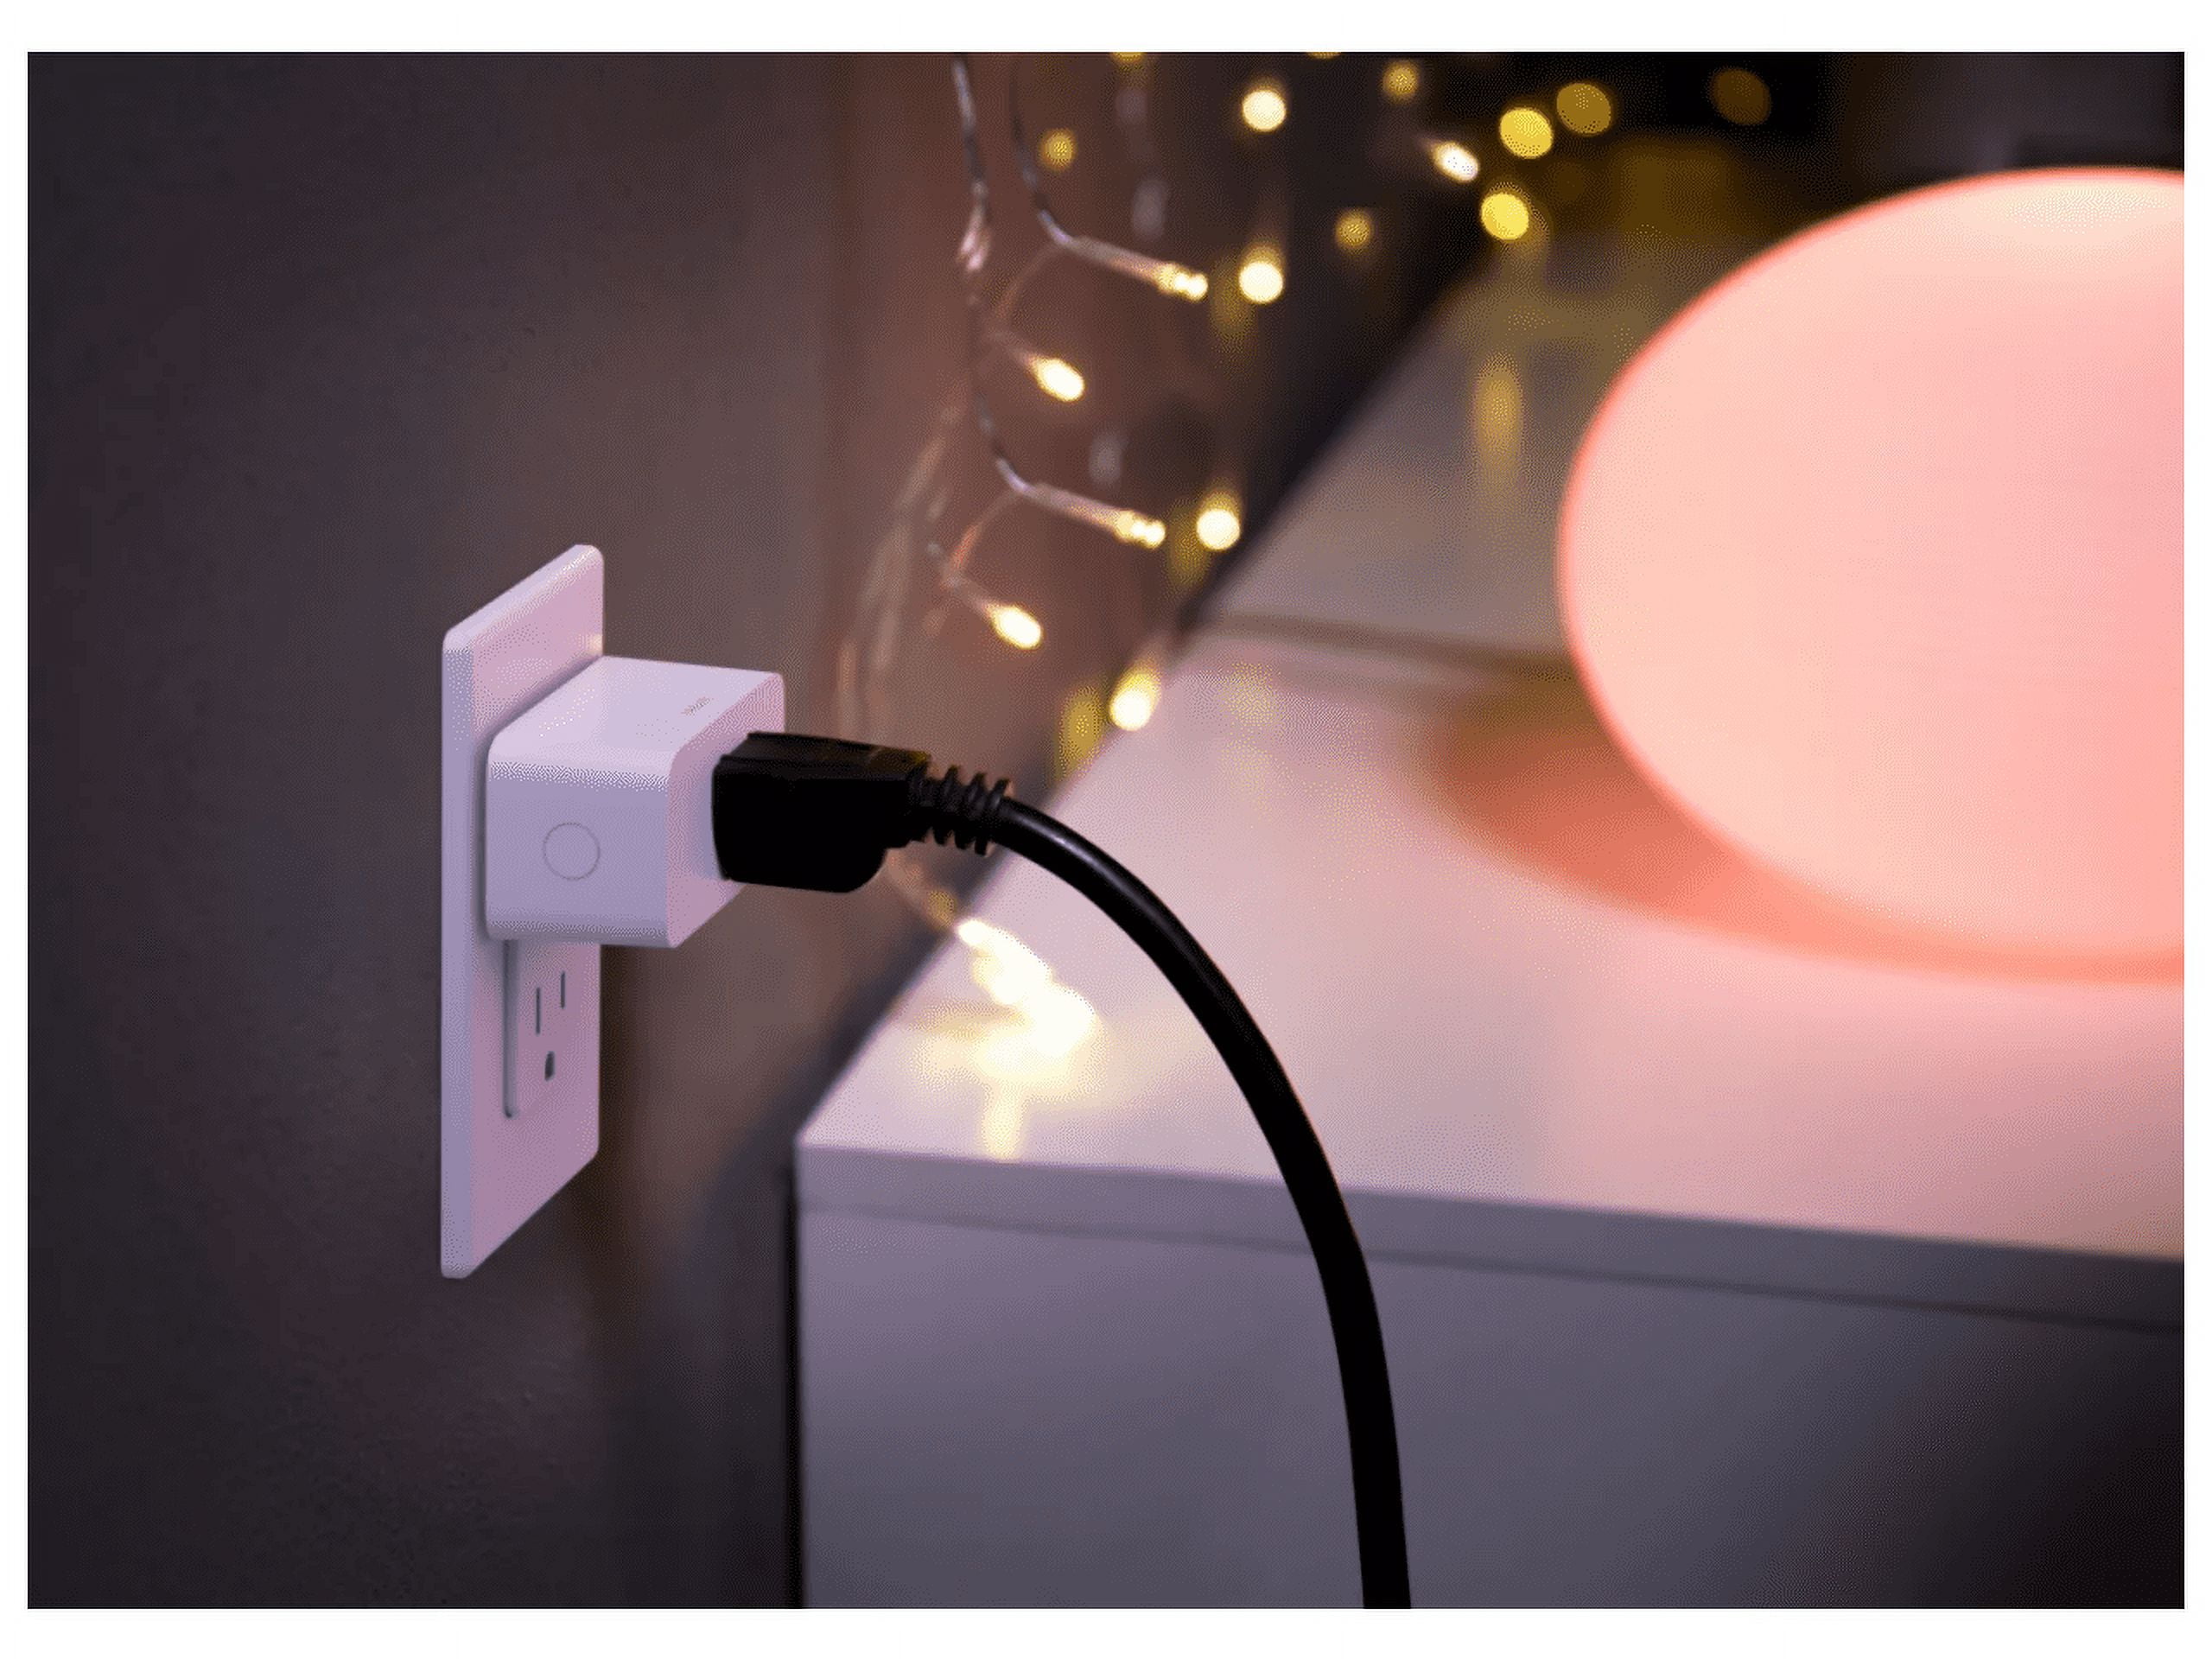 Philips Hue Smart Plug review: discreet and functional